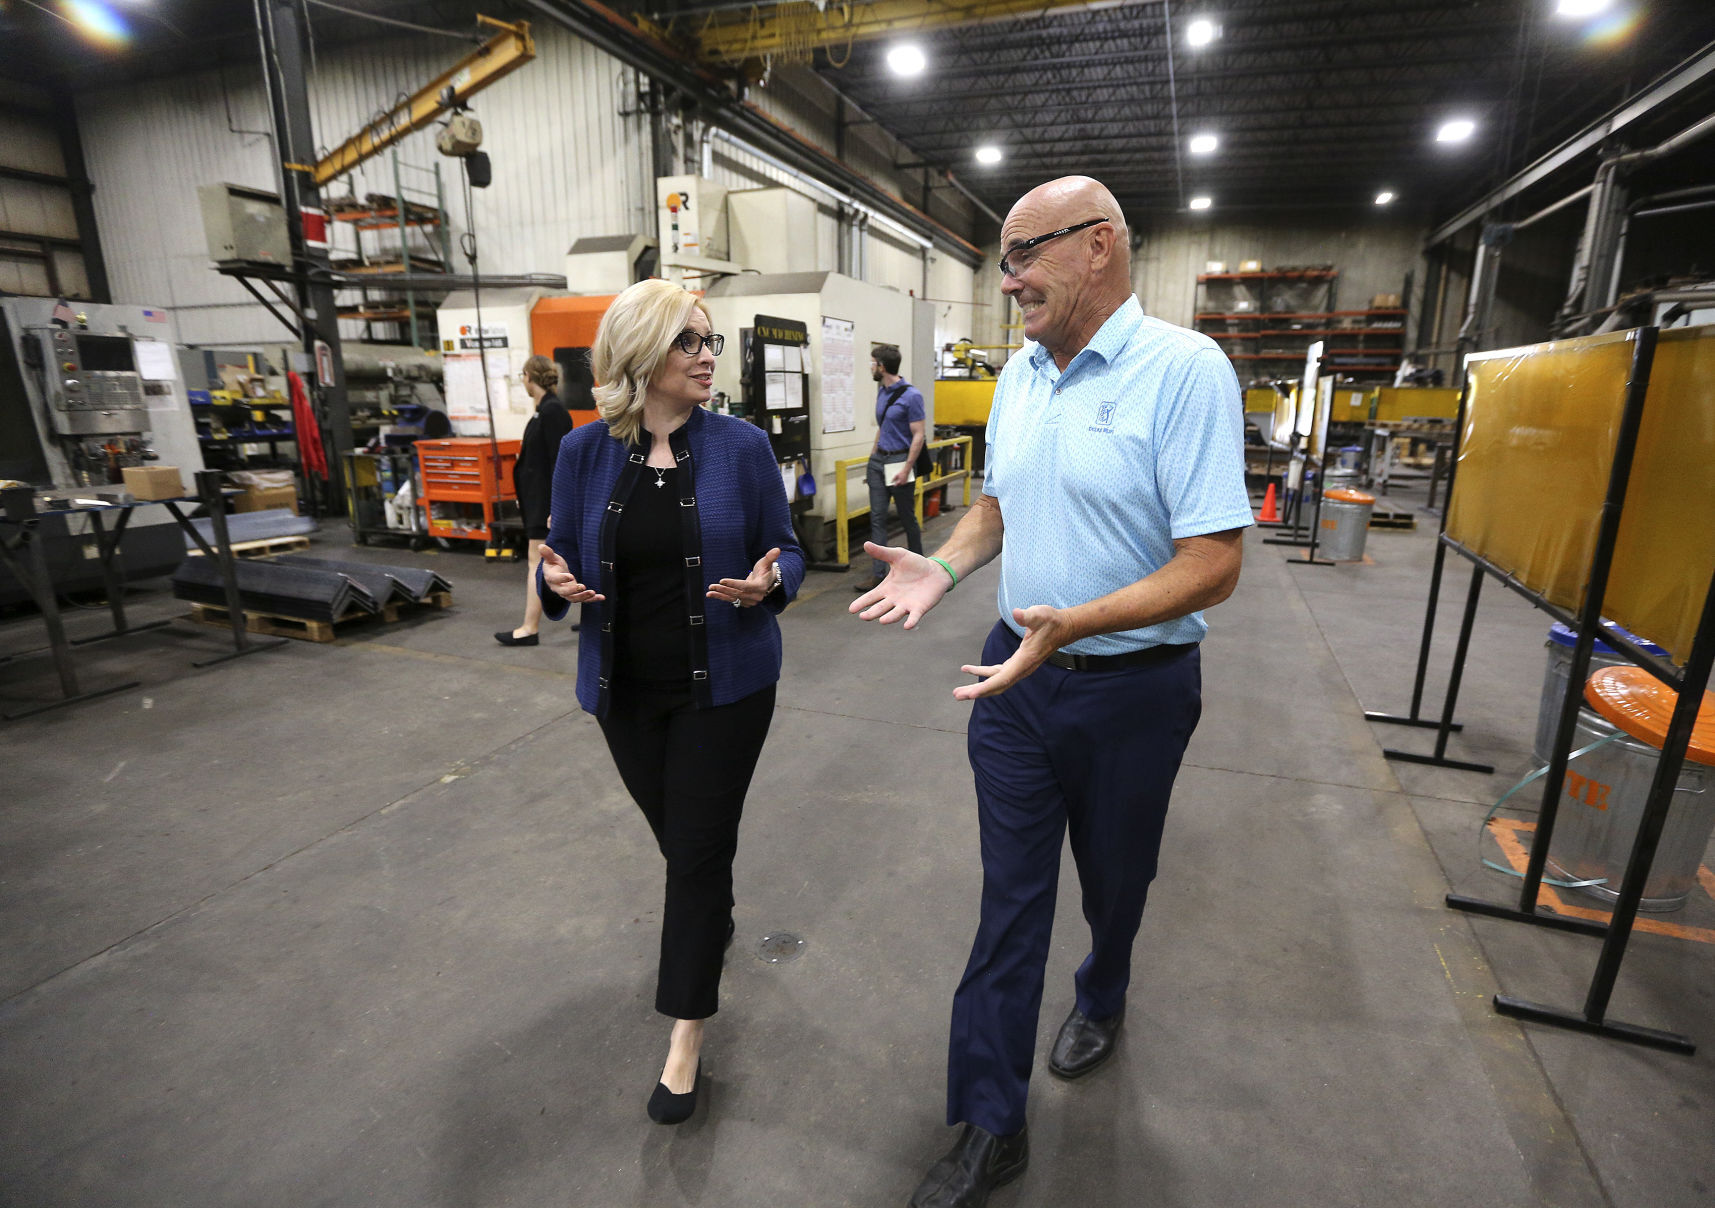 U.S. Rep. Ashley Hinson, R-Iowa, talks with Charlie Giese, president of Giese Companies in Dubuque during a tour of the manufacturing facility on Monday, May 23, 2022.    PHOTO CREDIT: Dave Kettering